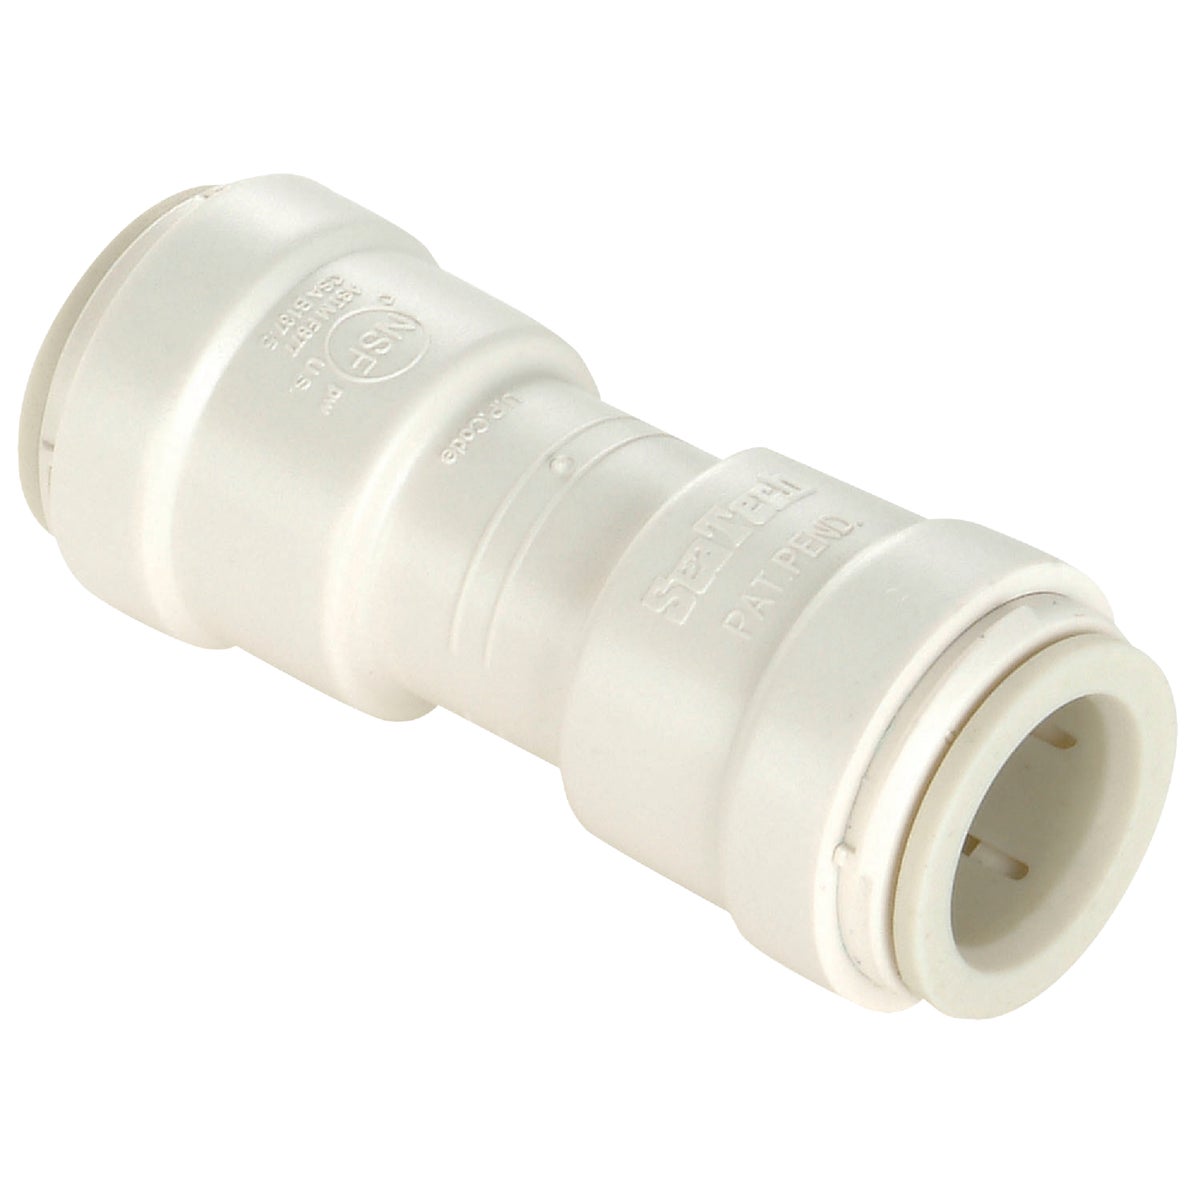 Watts 3/4 In. x 3/4 In. Quick Connect Plastic Coupling